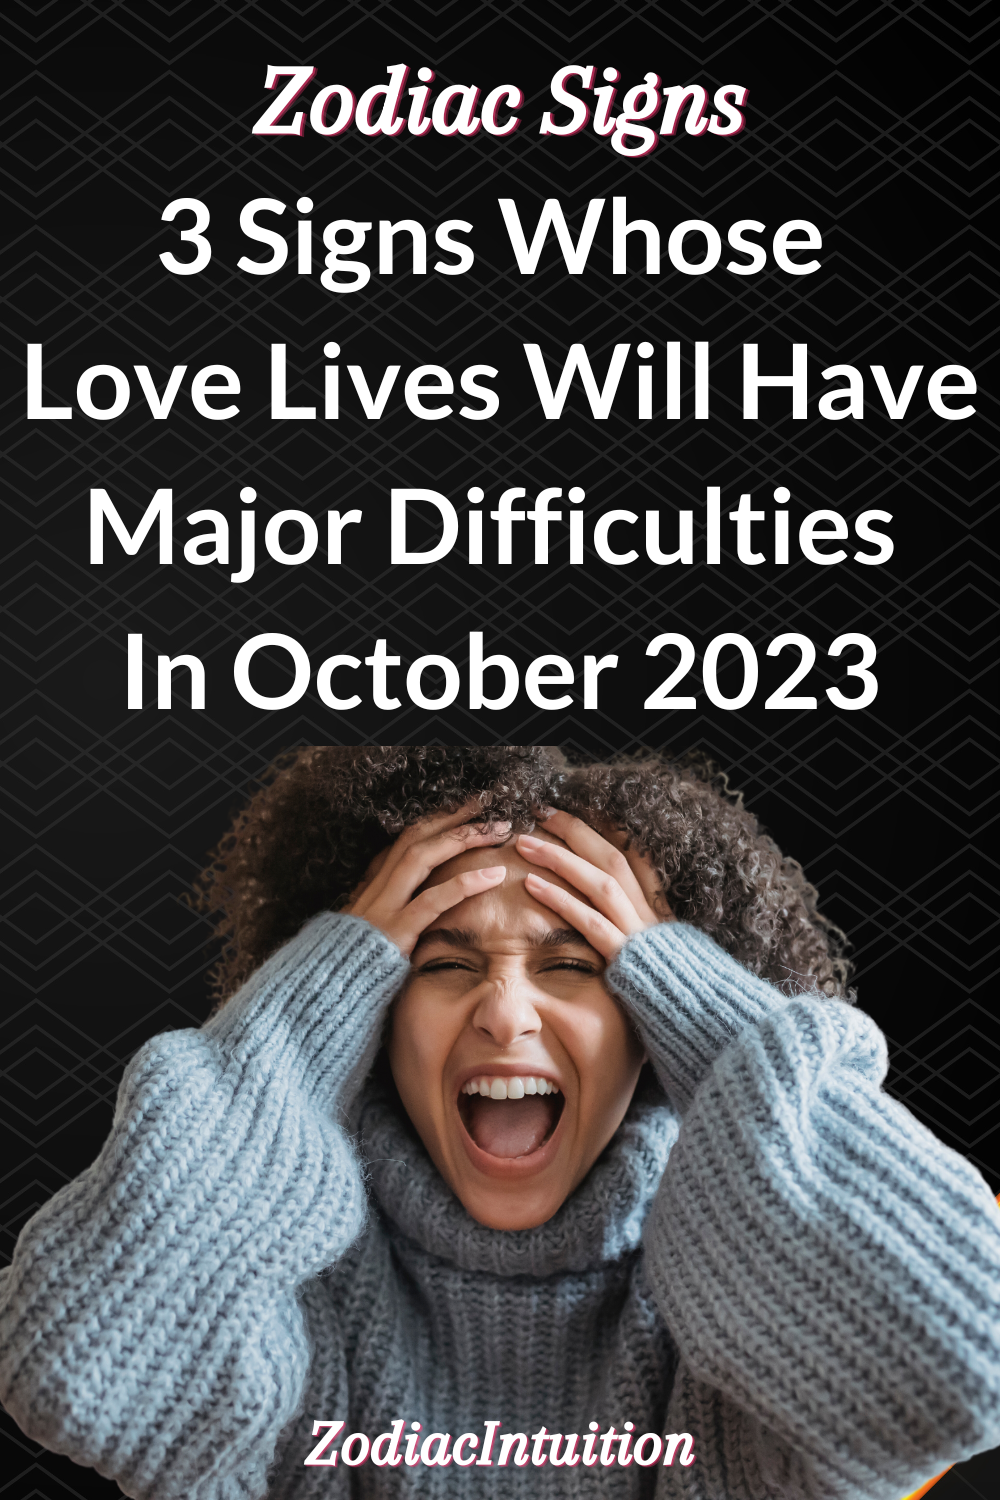 3 Signs Whose Love Lives Will Have Major Difficulties In October 2023